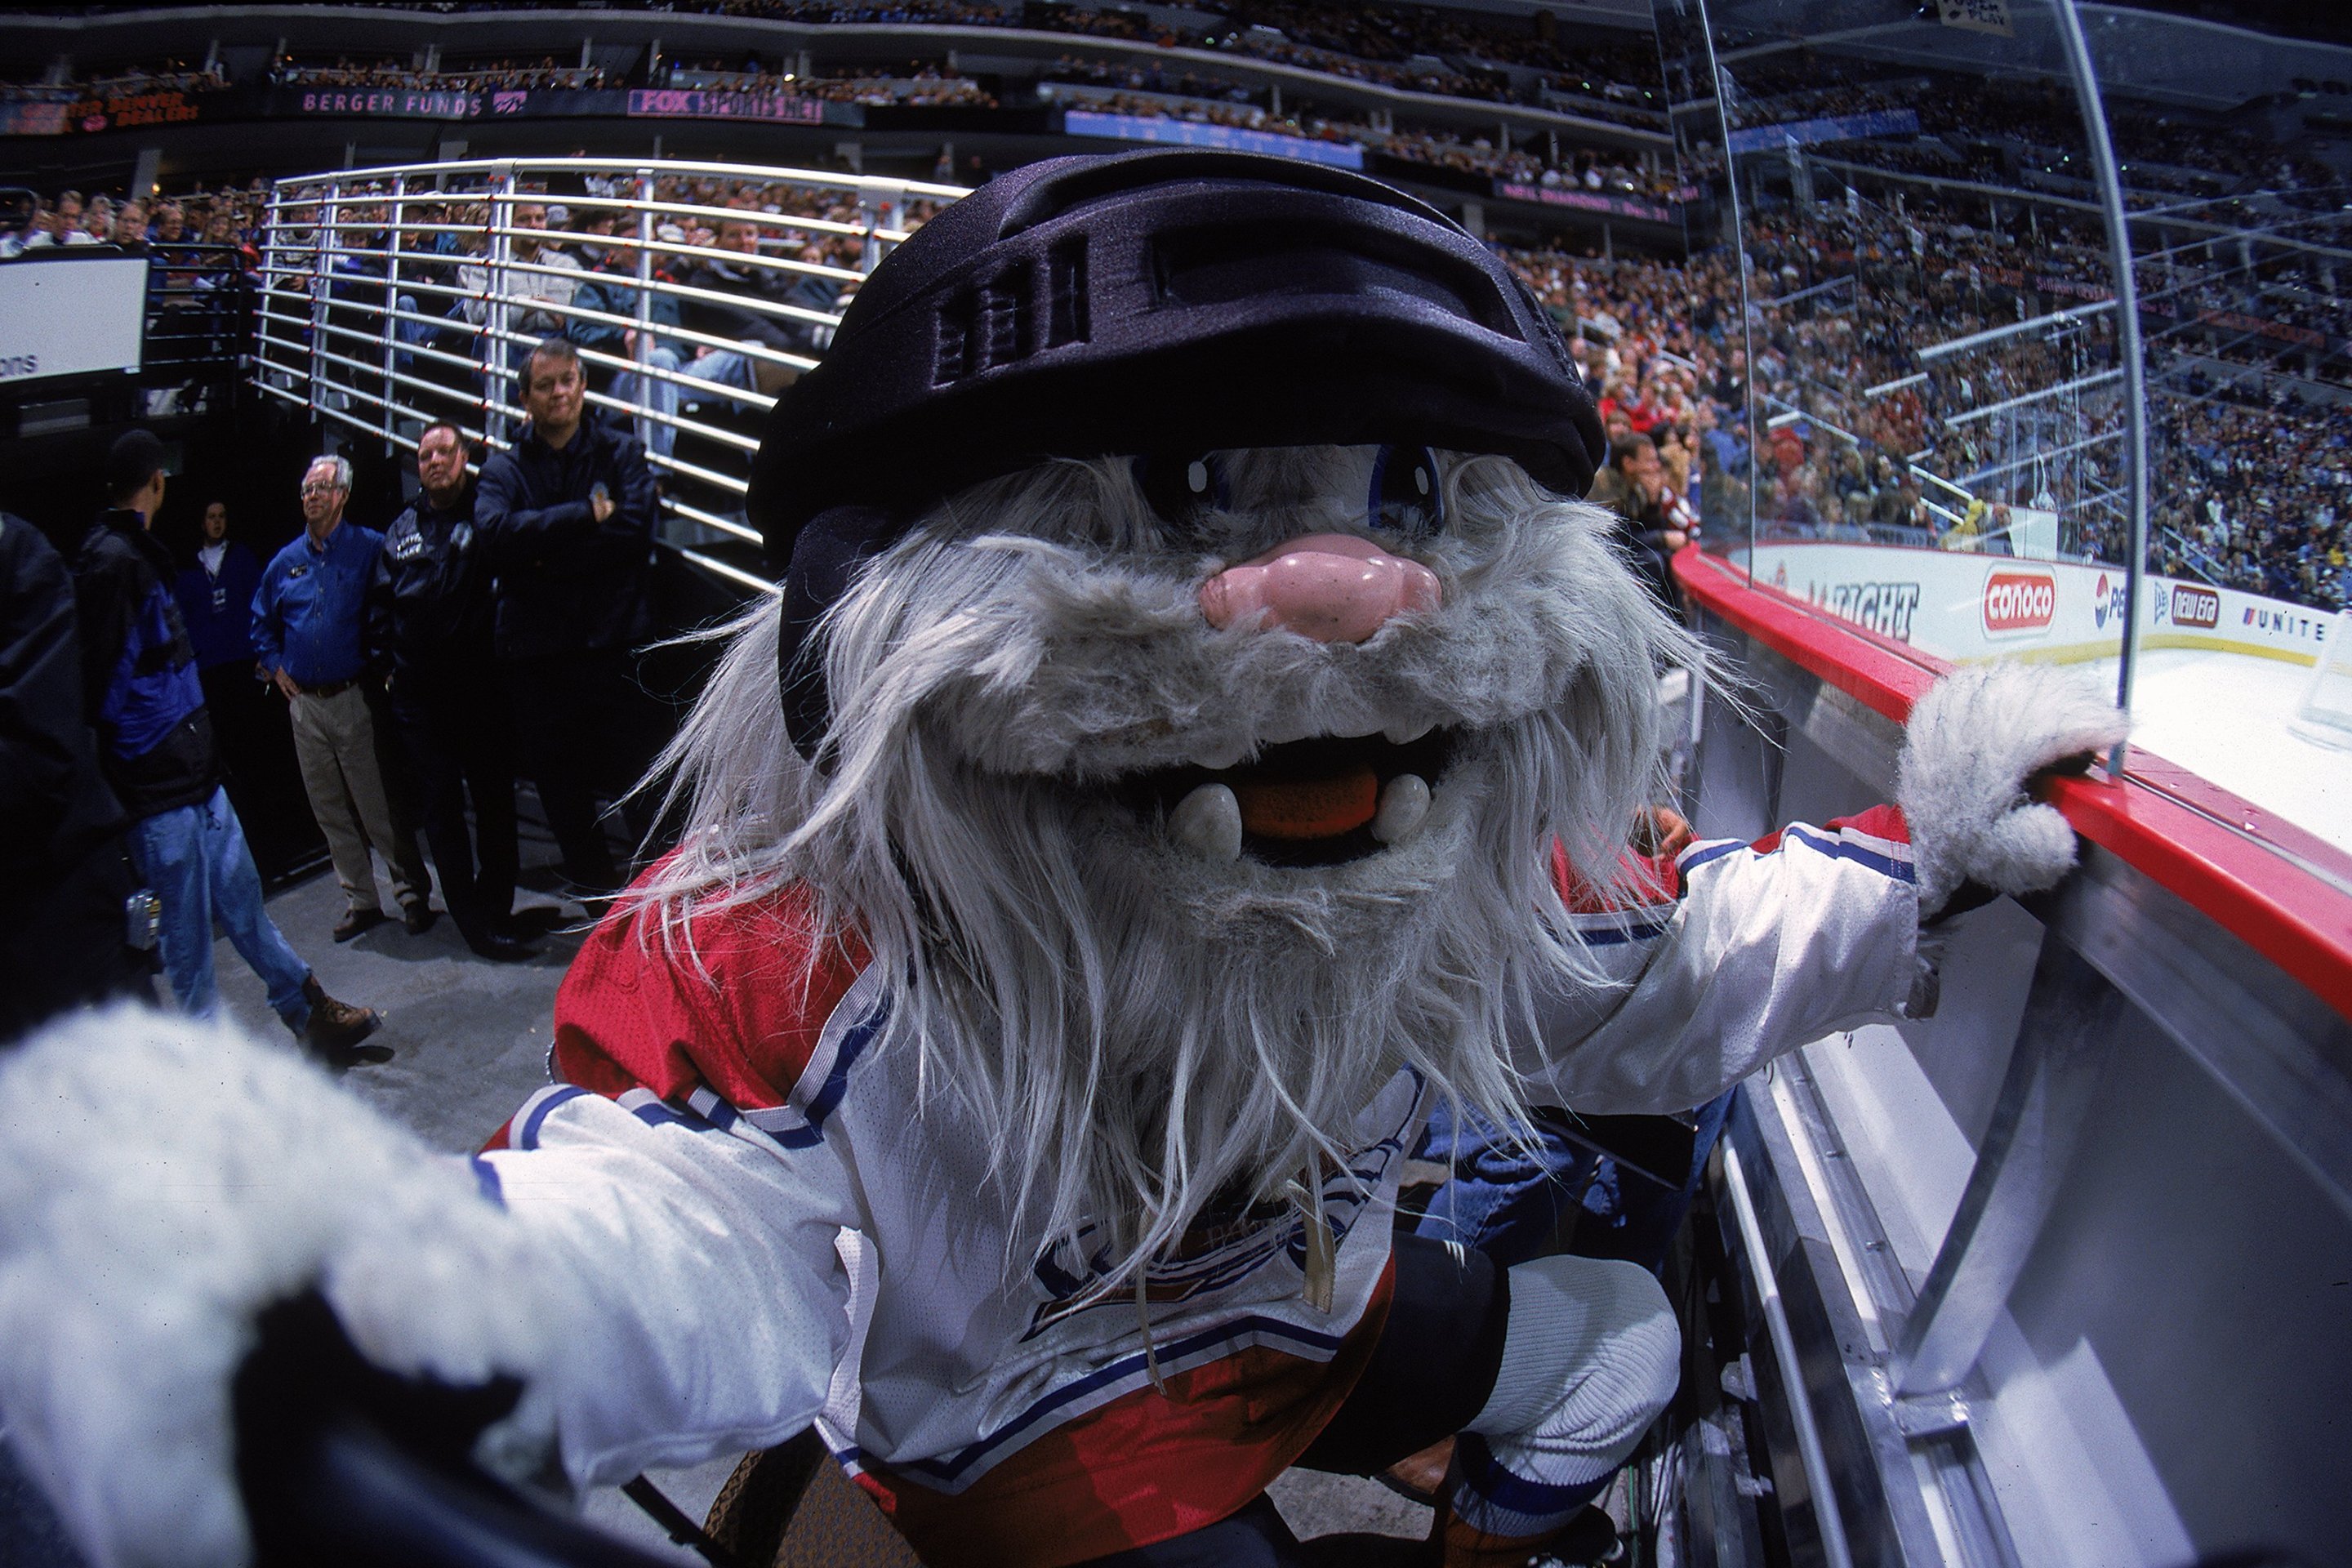 16 Nov 1999: The Mascot of the Colorado Avalanche smiles for the camera during the game against the Ottowa Senators at the Pepsi Center in Denver, Colorado. The Avalanche defeated the Senators 2-1. Mandatory Credit: Brian Bahr /Allsport